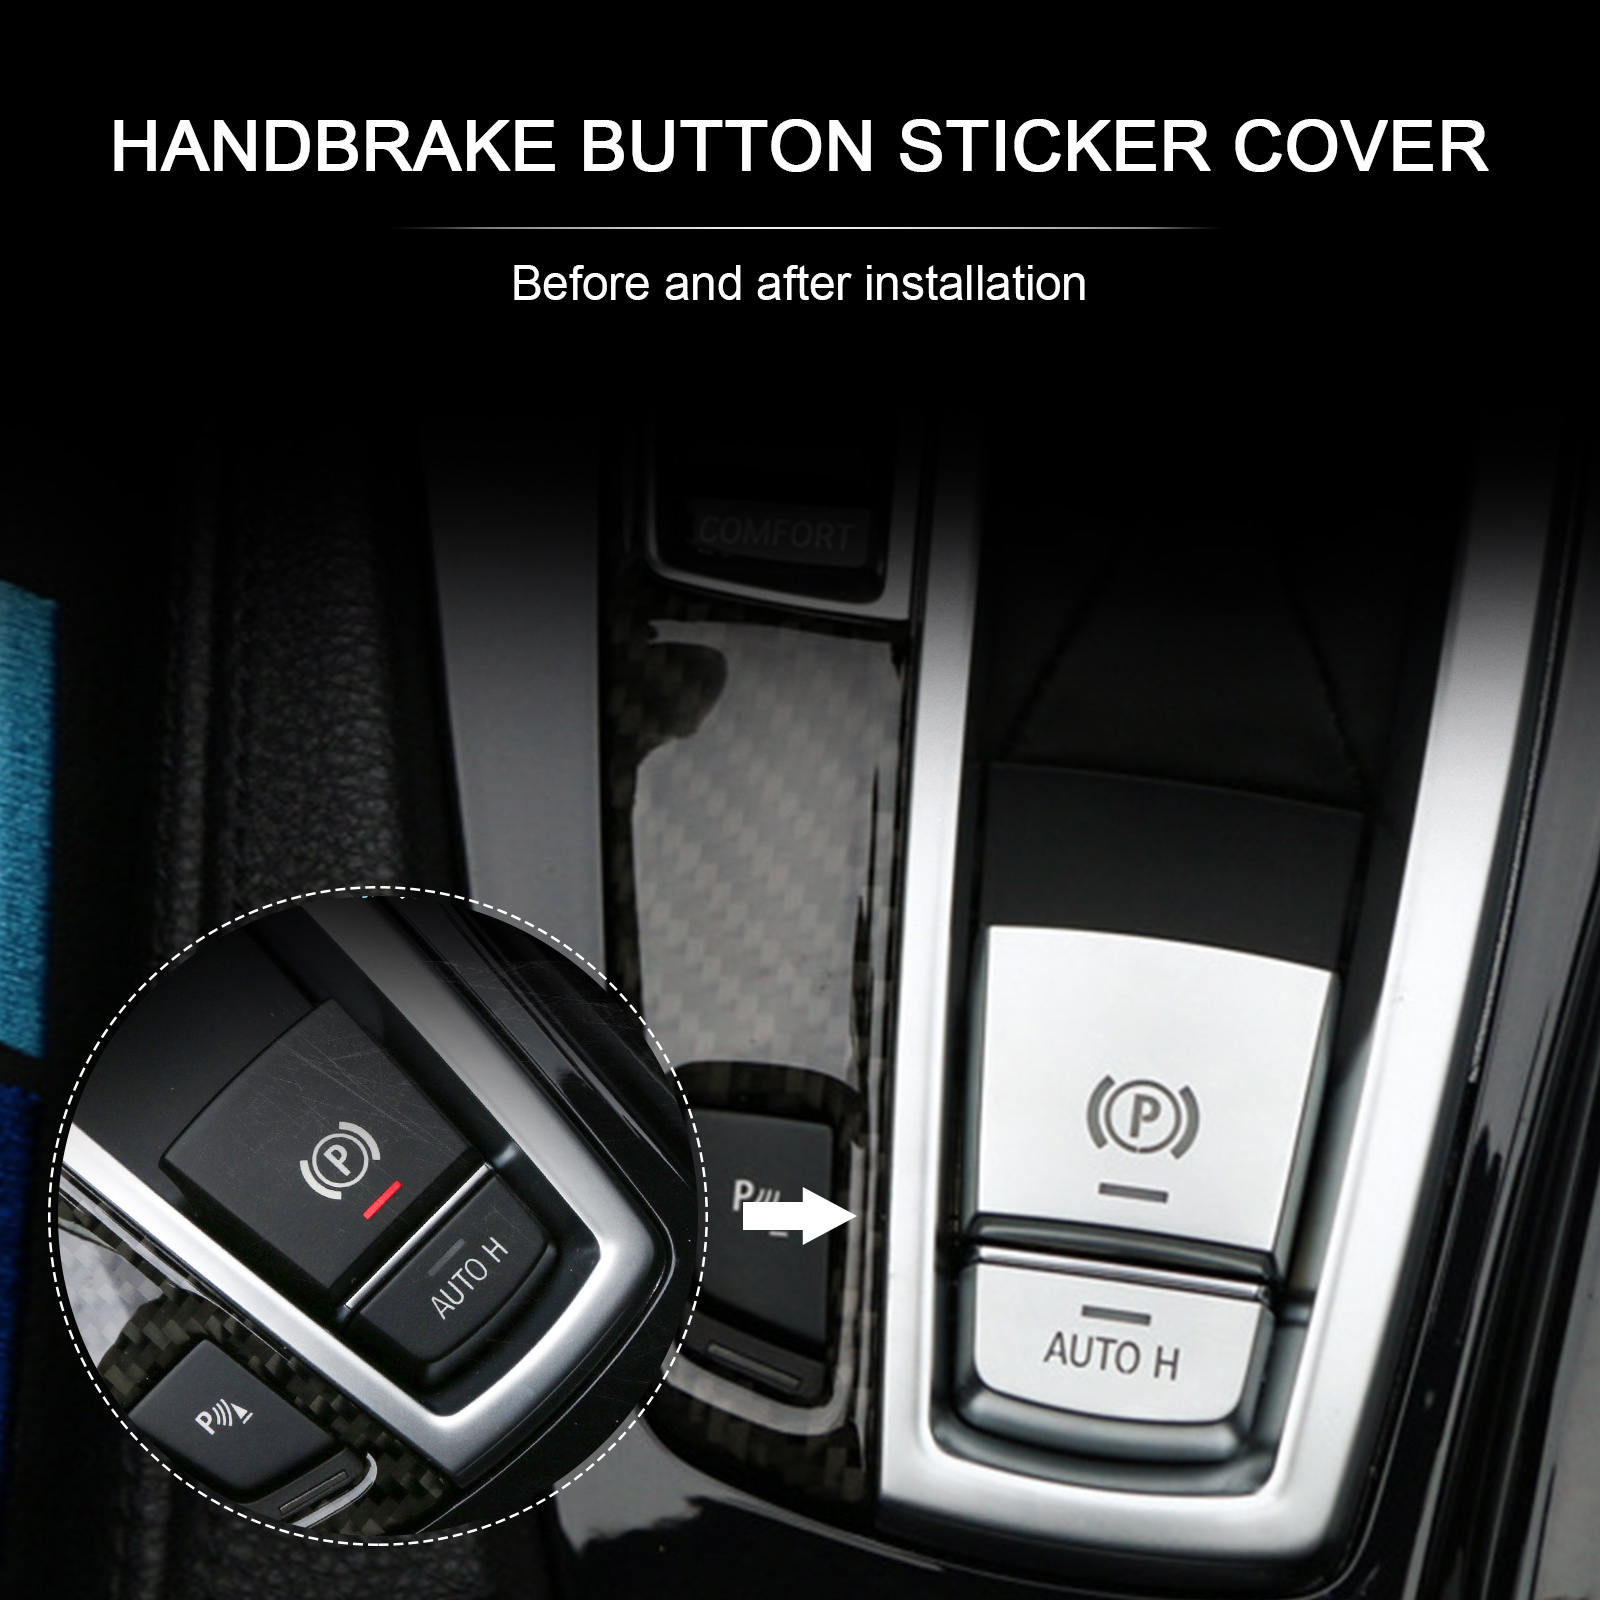 Electrical Parking&Auto Hold Cover ABS Electrical Parking Manual BrakeP Stalls & Auto Hold Button Cover Trim For BMW X3/X4/X5 F15/X6 F16 